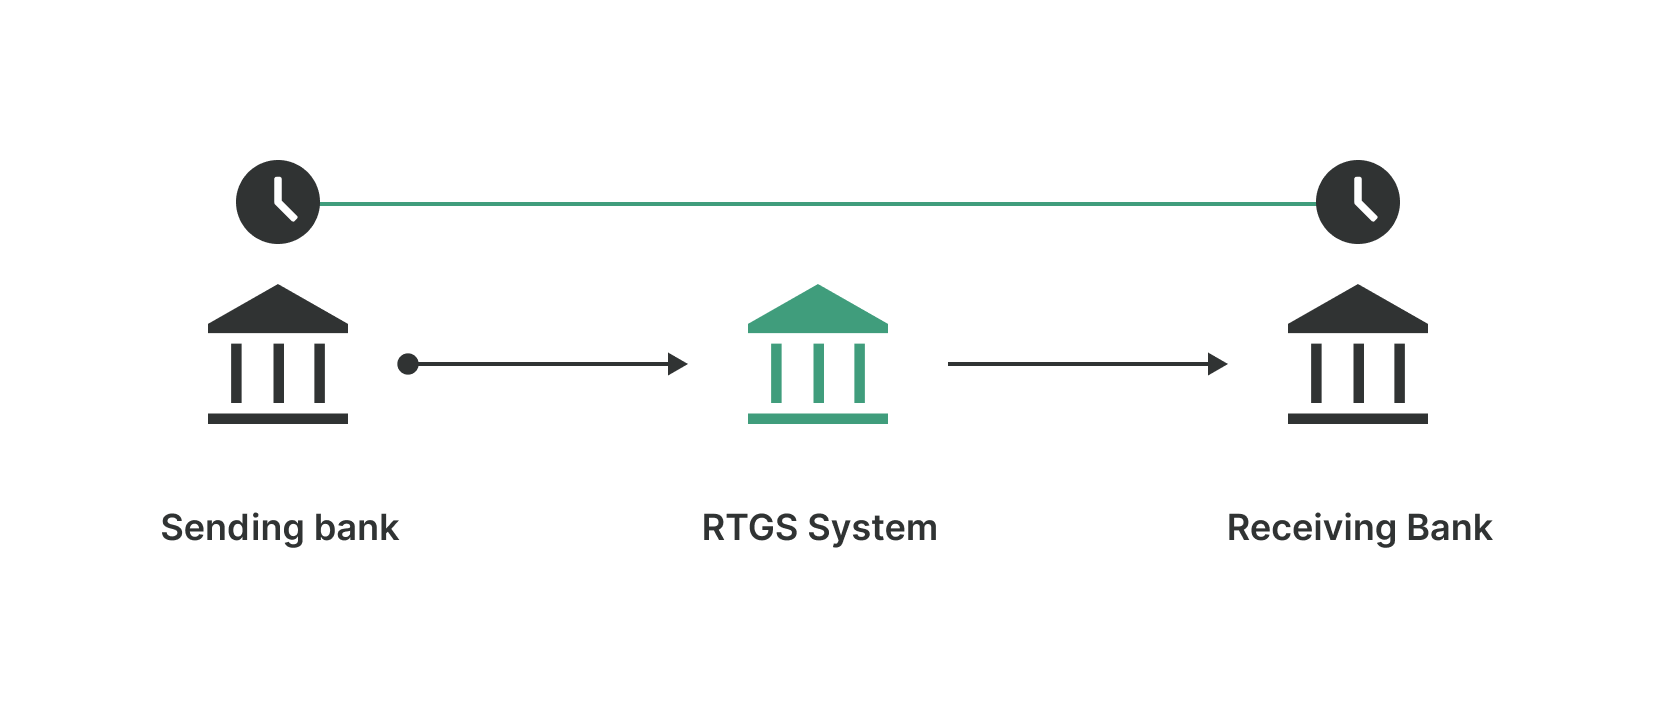 Depending on which RTGS system is being used, transactions can settle anywhere from instantaneously to within 30 minutes. 